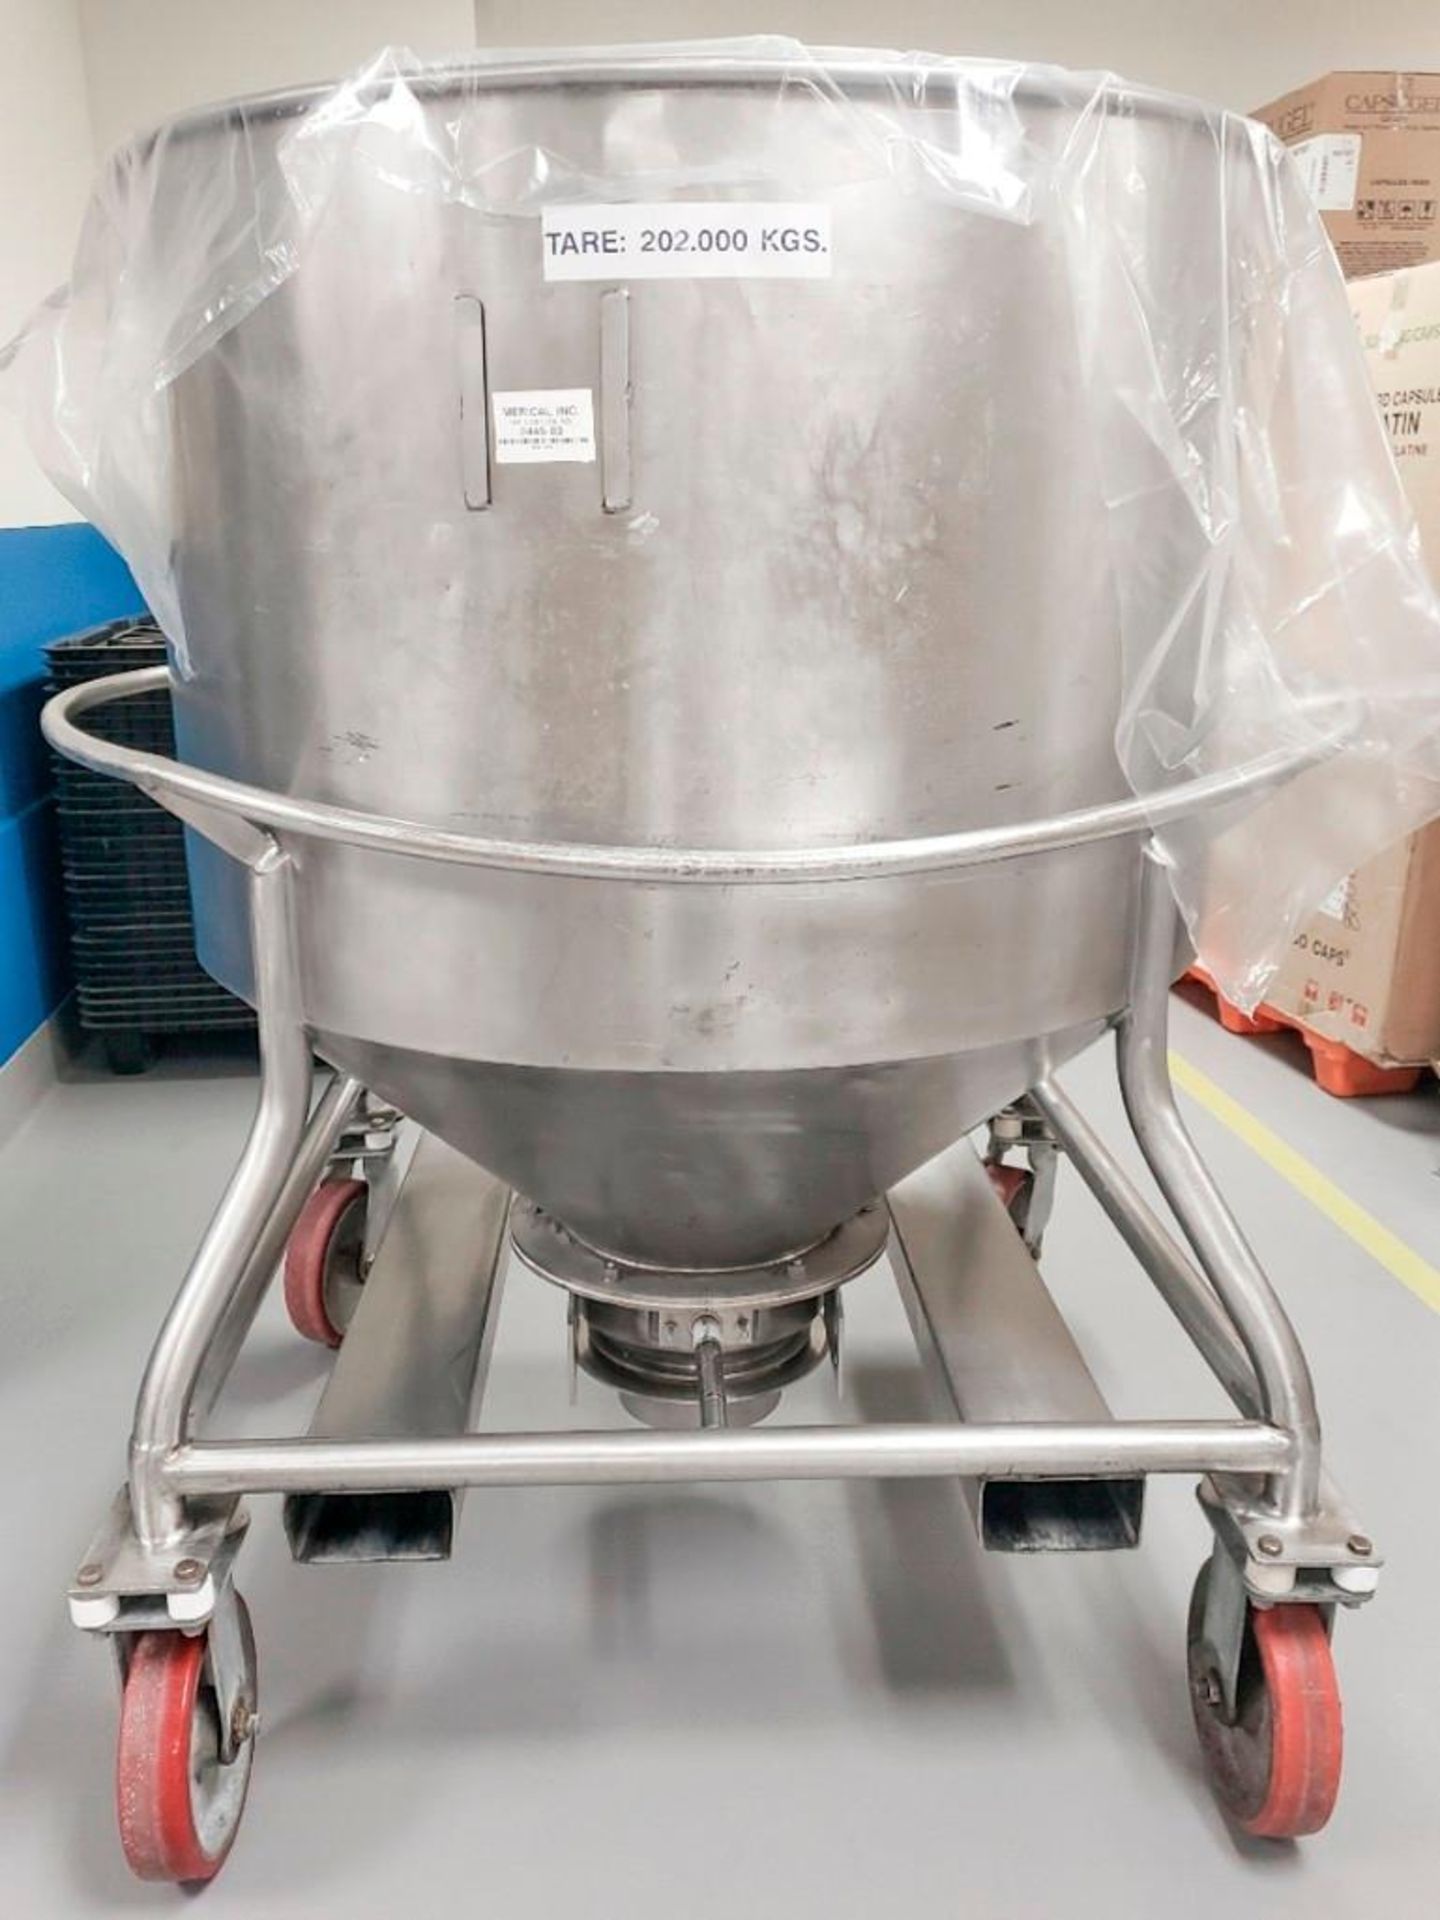 700Kg Capacity Charge Kettle - Image 10 of 12